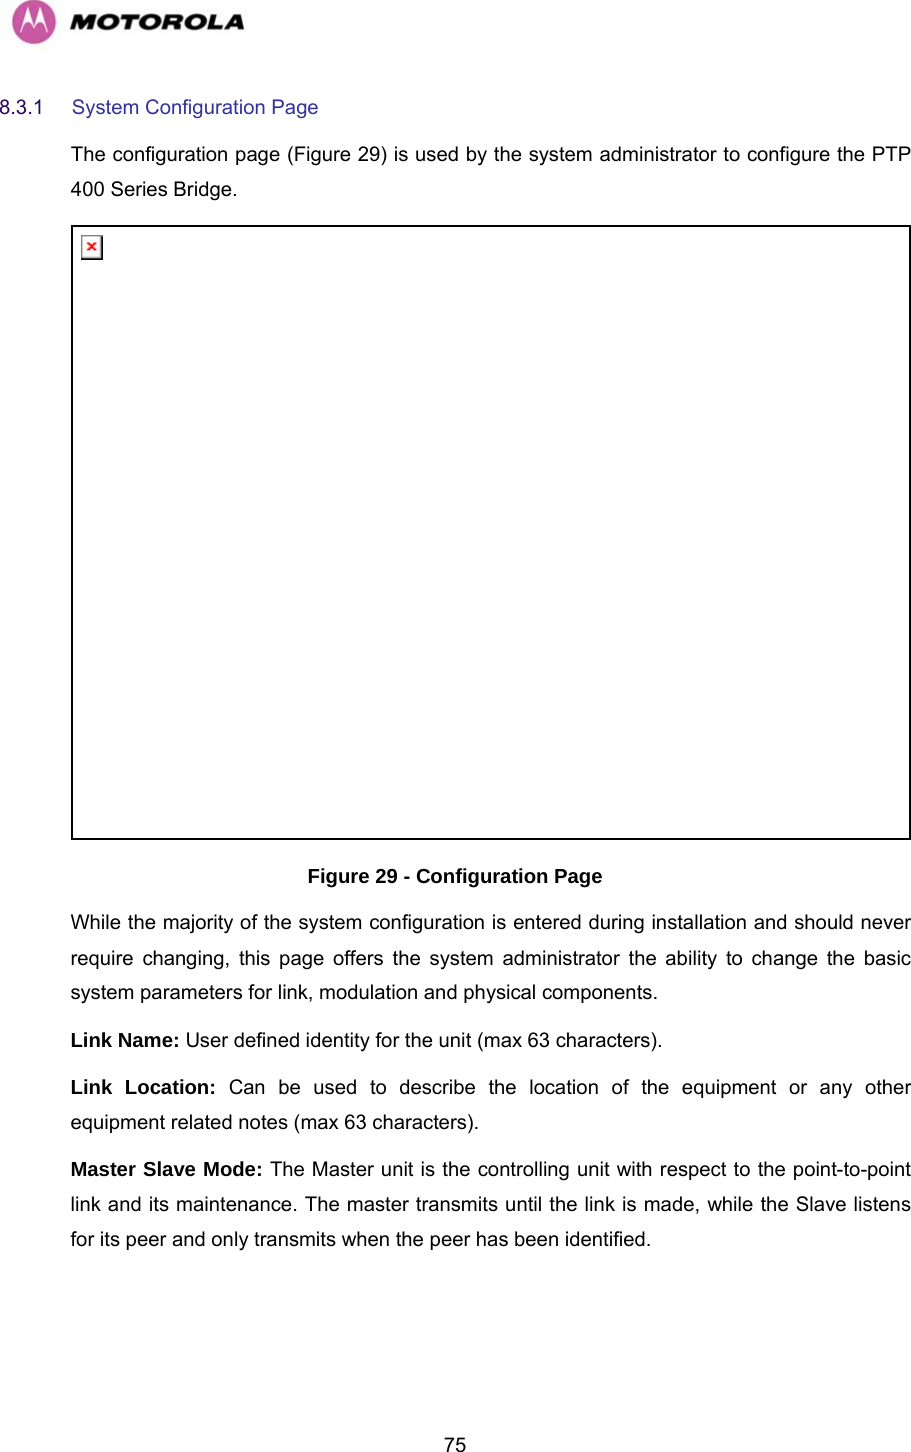   758.3.1  System Configuration Page  The configuration page (Figure 29) is used by the system administrator to configure the PTP 400 Series Bridge.  Figure 29 - Configuration Page While the majority of the system configuration is entered during installation and should never require changing, this page offers the system administrator the ability to change the basic system parameters for link, modulation and physical components.  Link Name: User defined identity for the unit (max 63 characters).  Link Location: Can be used to describe the location of the equipment or any other equipment related notes (max 63 characters).  Master Slave Mode: The Master unit is the controlling unit with respect to the point-to-point link and its maintenance. The master transmits until the link is made, while the Slave listens for its peer and only transmits when the peer has been identified. 